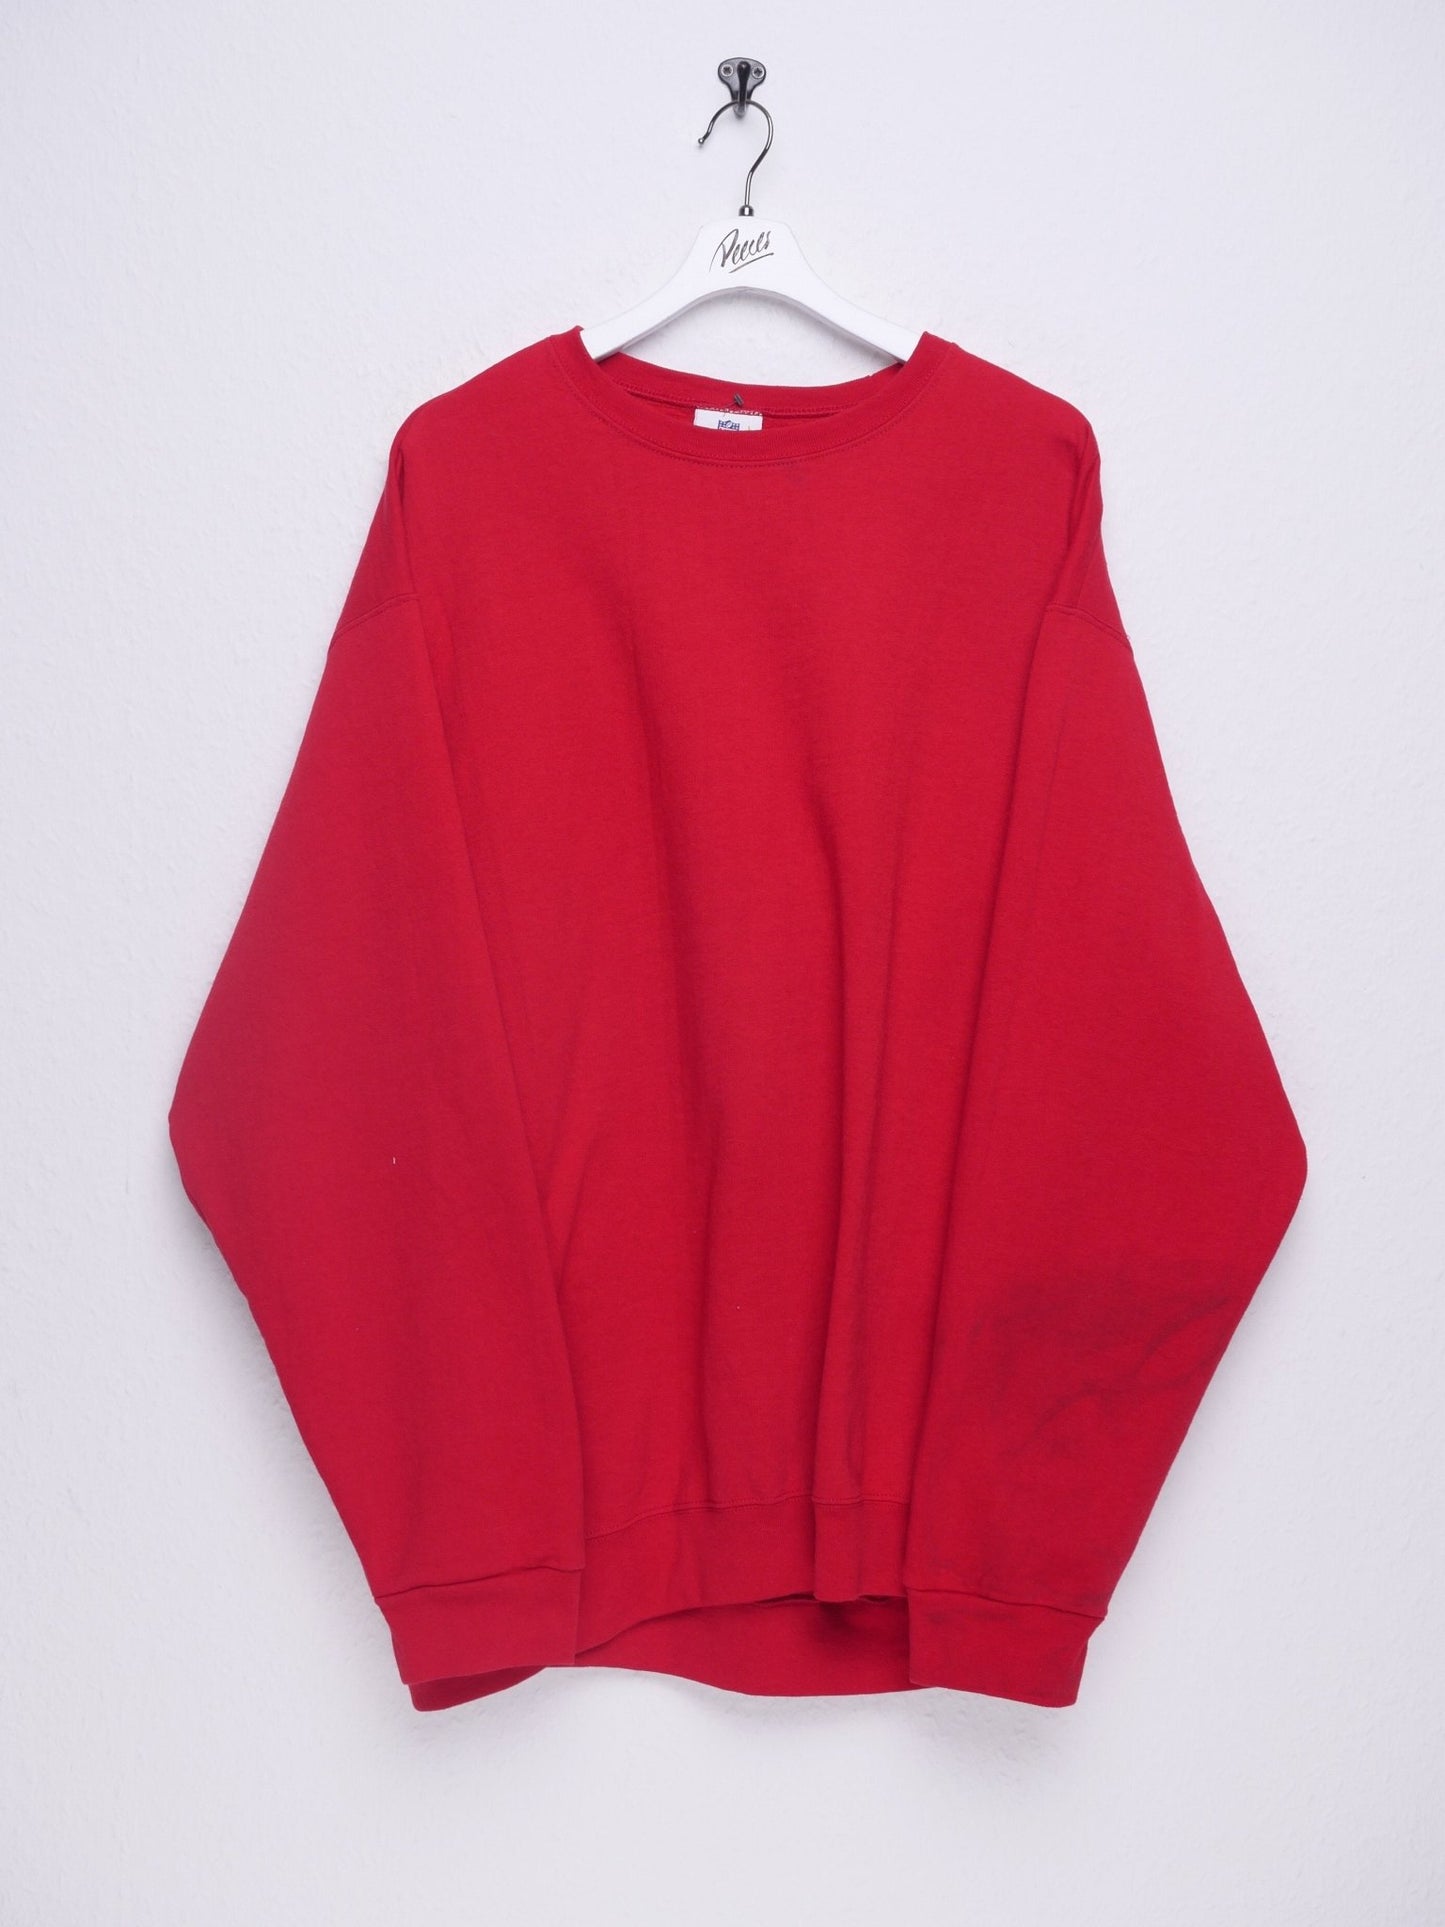 nfl red Basic Sweater - Peeces